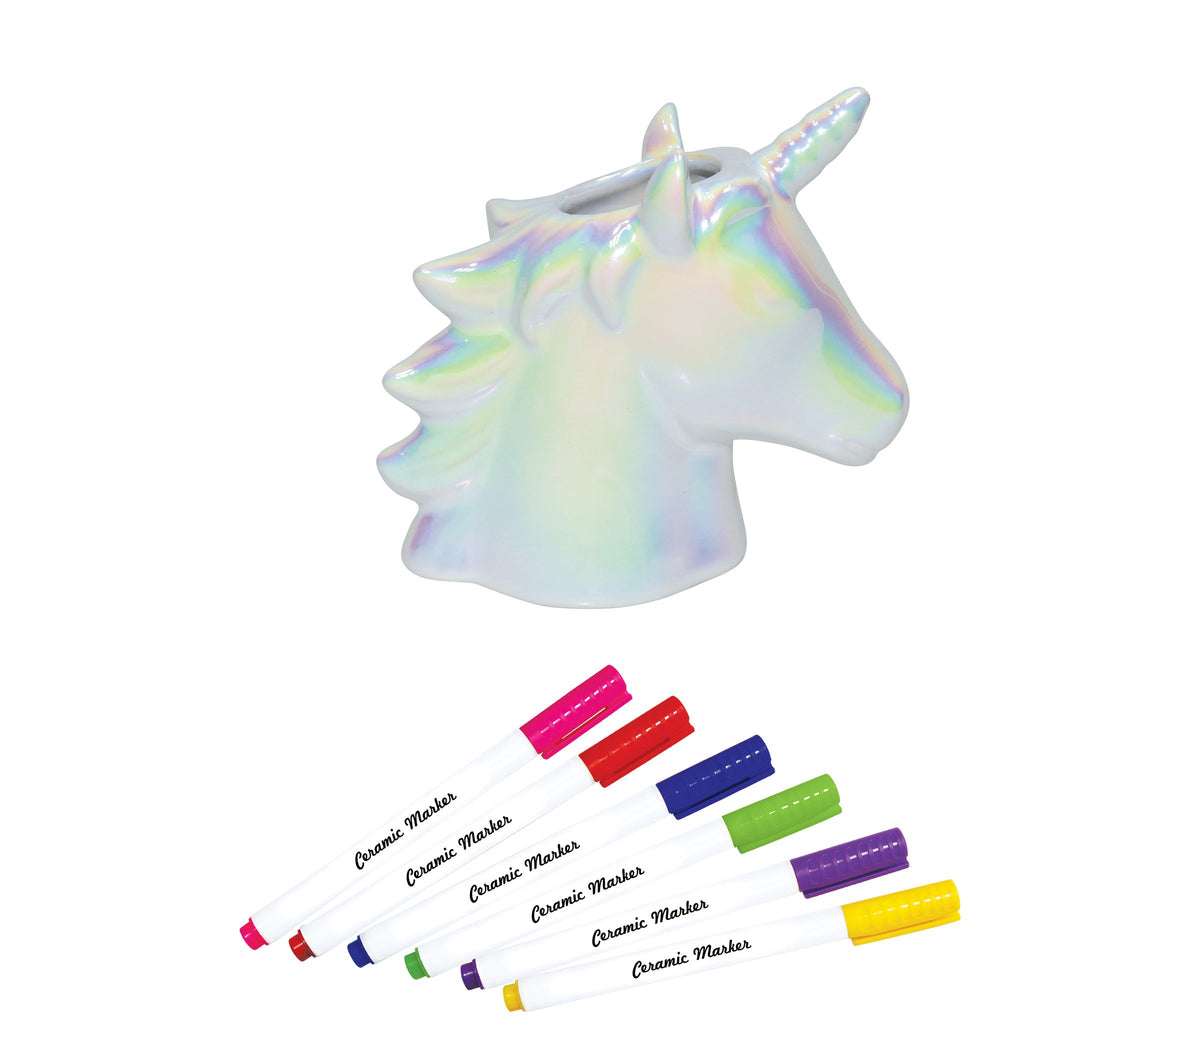 Champion Paint Your Own Rainbow Plated Unicorn Pencil Holder